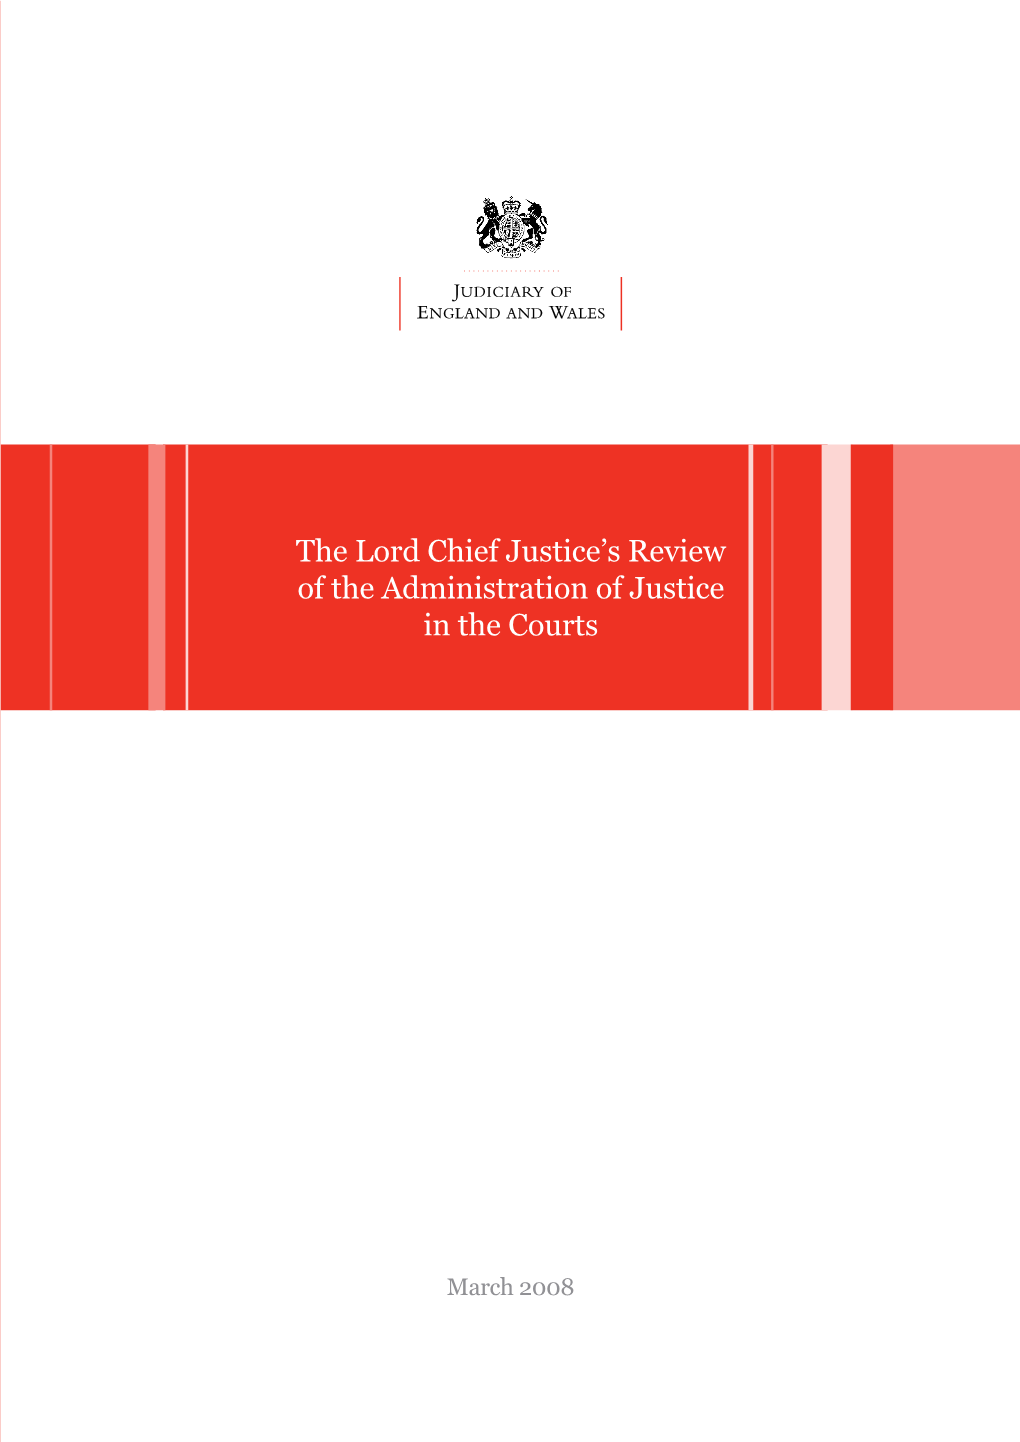 The Lord Chief Justice's Review of the Administration of Justice in the Courts